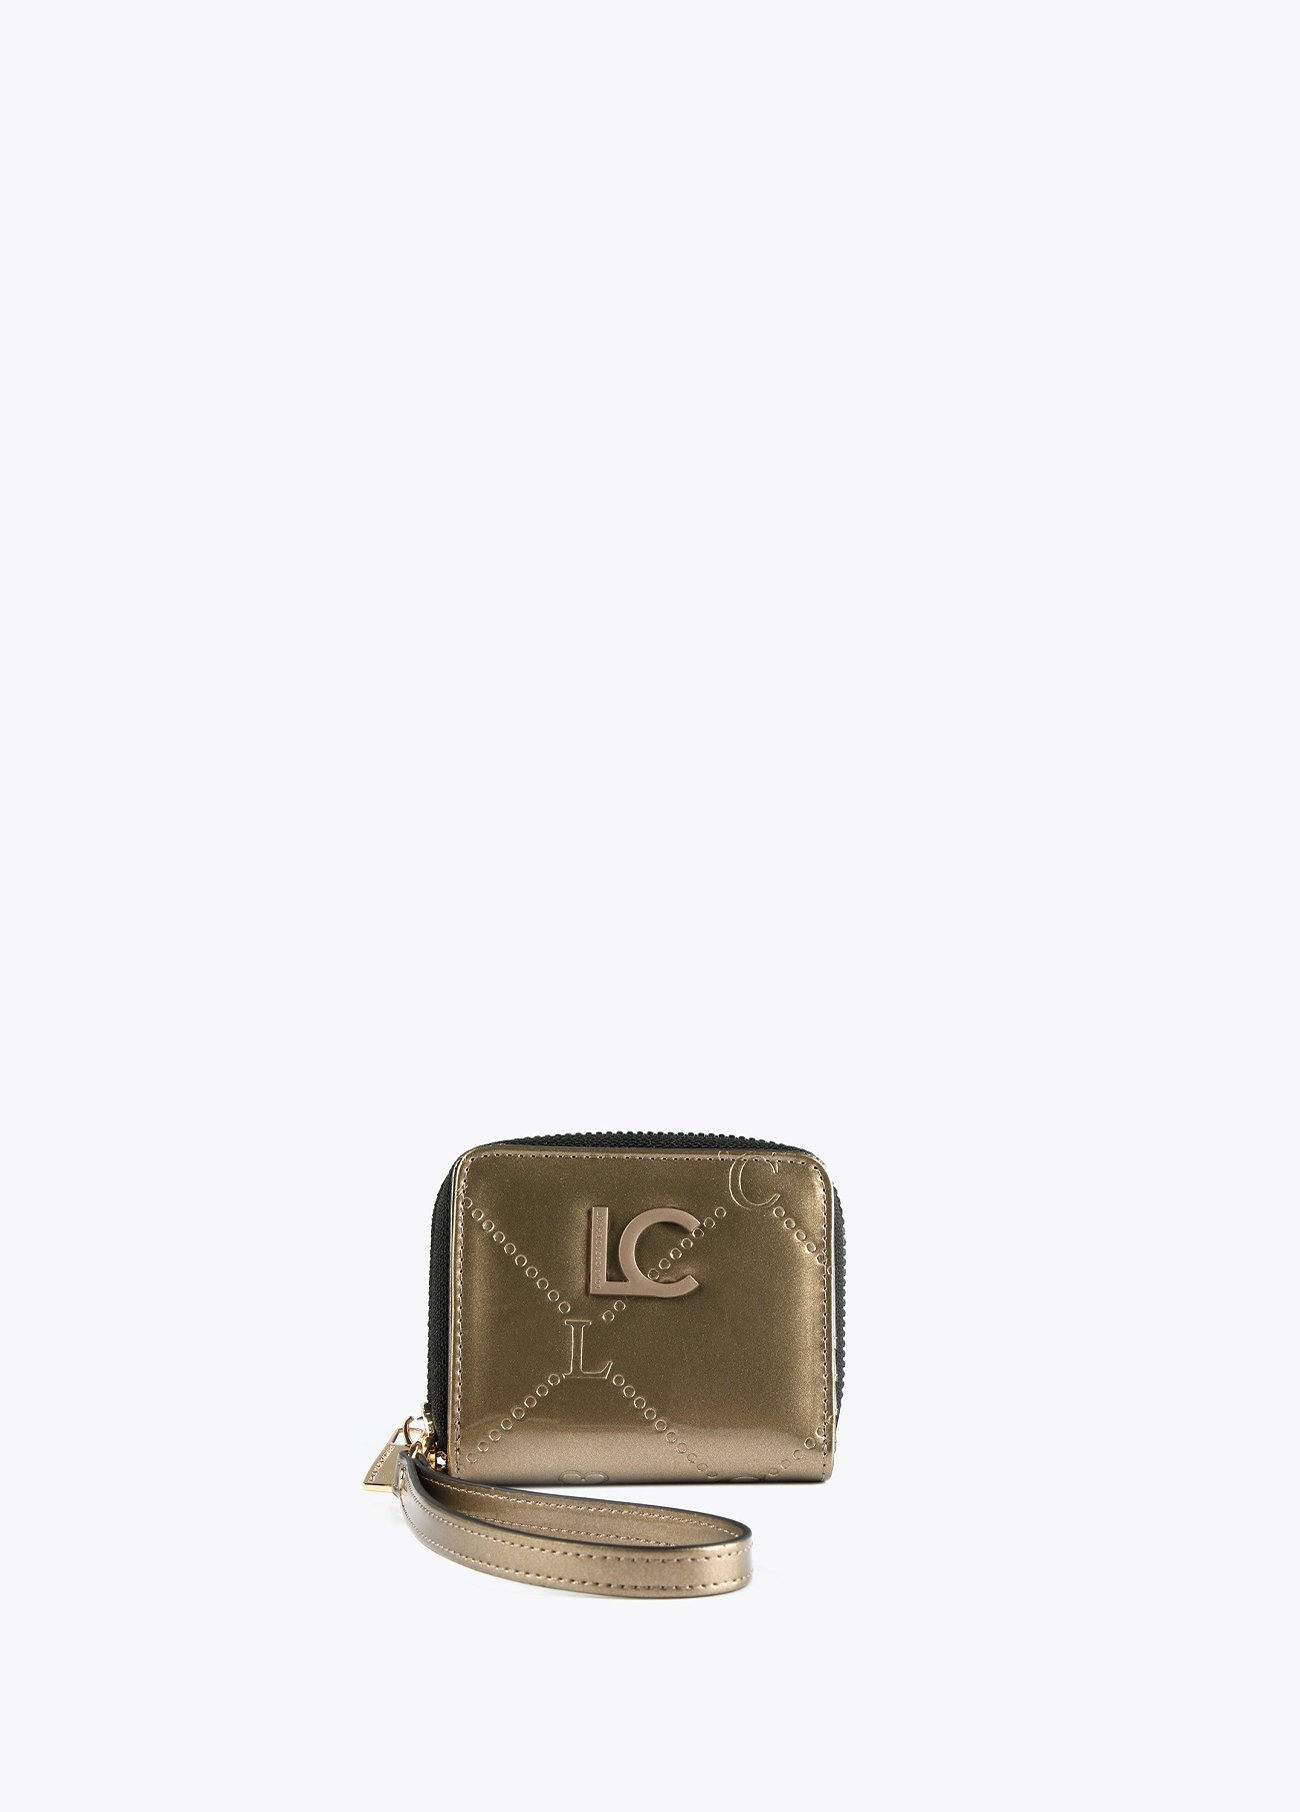 Patent leather purse, Bags